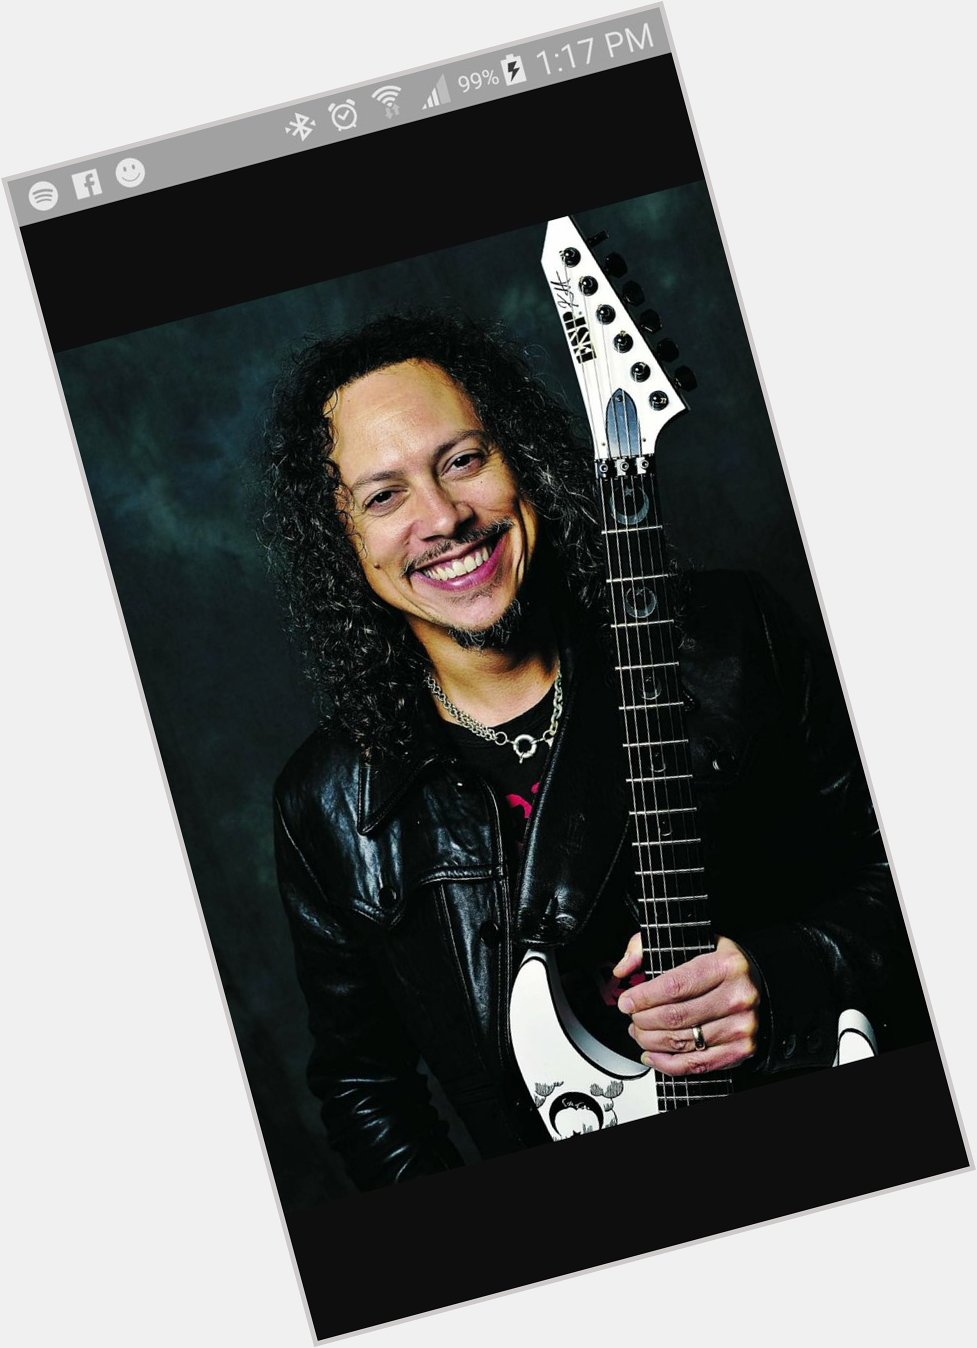 Happy Birthday to the one and only Kirk Hammett! Lead Guitarist for Metallica!  